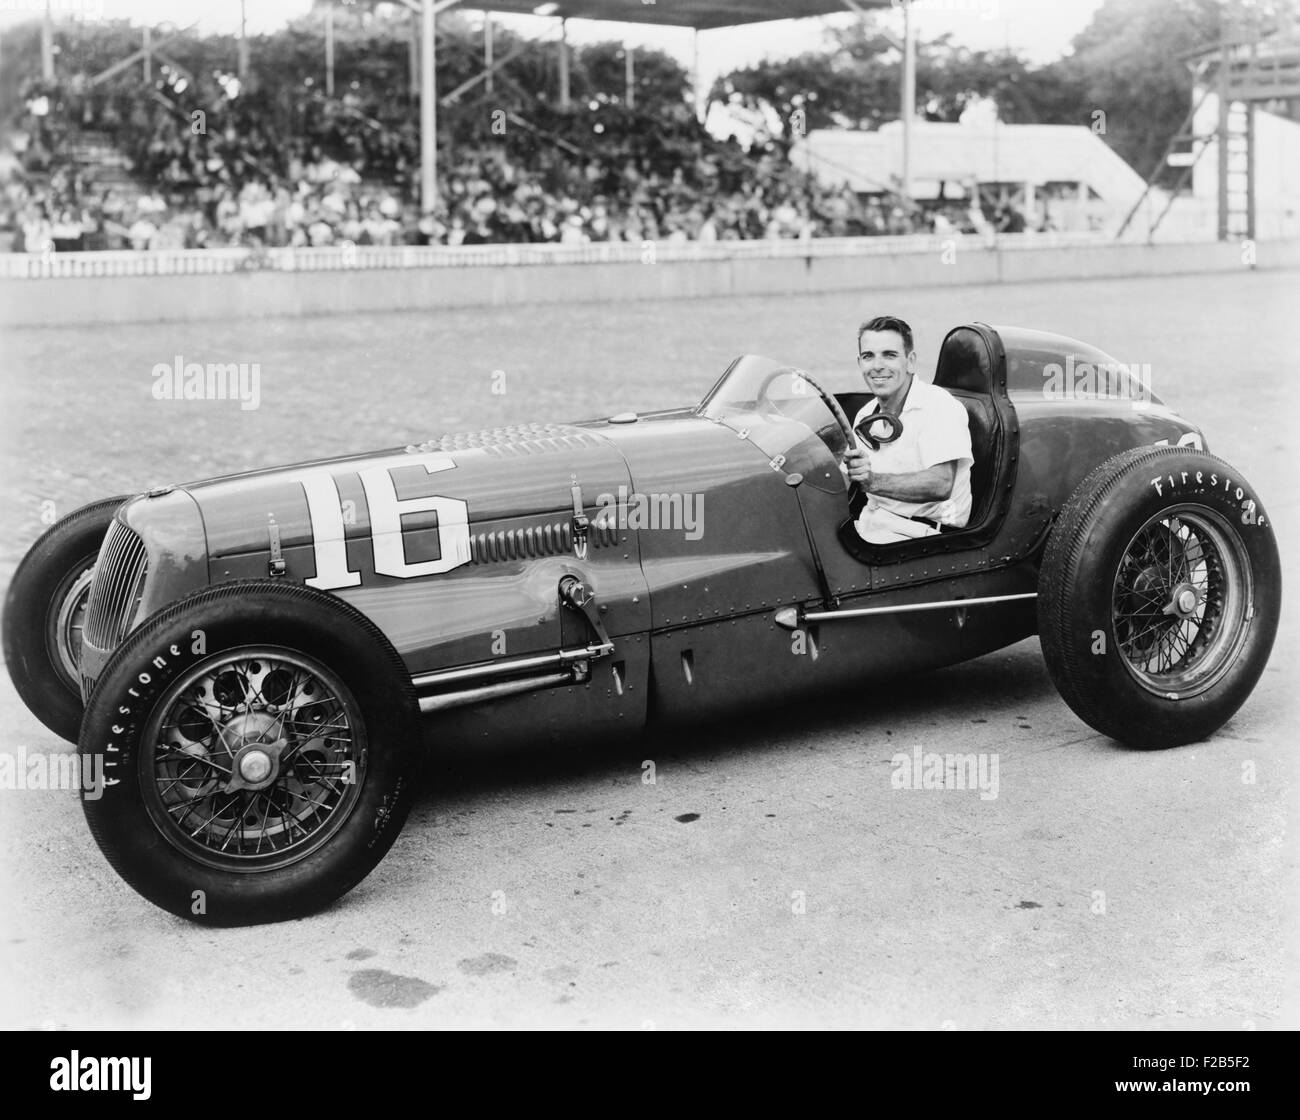 George Robson was the winner of the 1946 Indianapolis 500. Robson was killed in multi-car pile-up later that year at Lakewood Speedway in Atlanta, Georgia. - (BSLOC 2014 17 178) Stock Photo